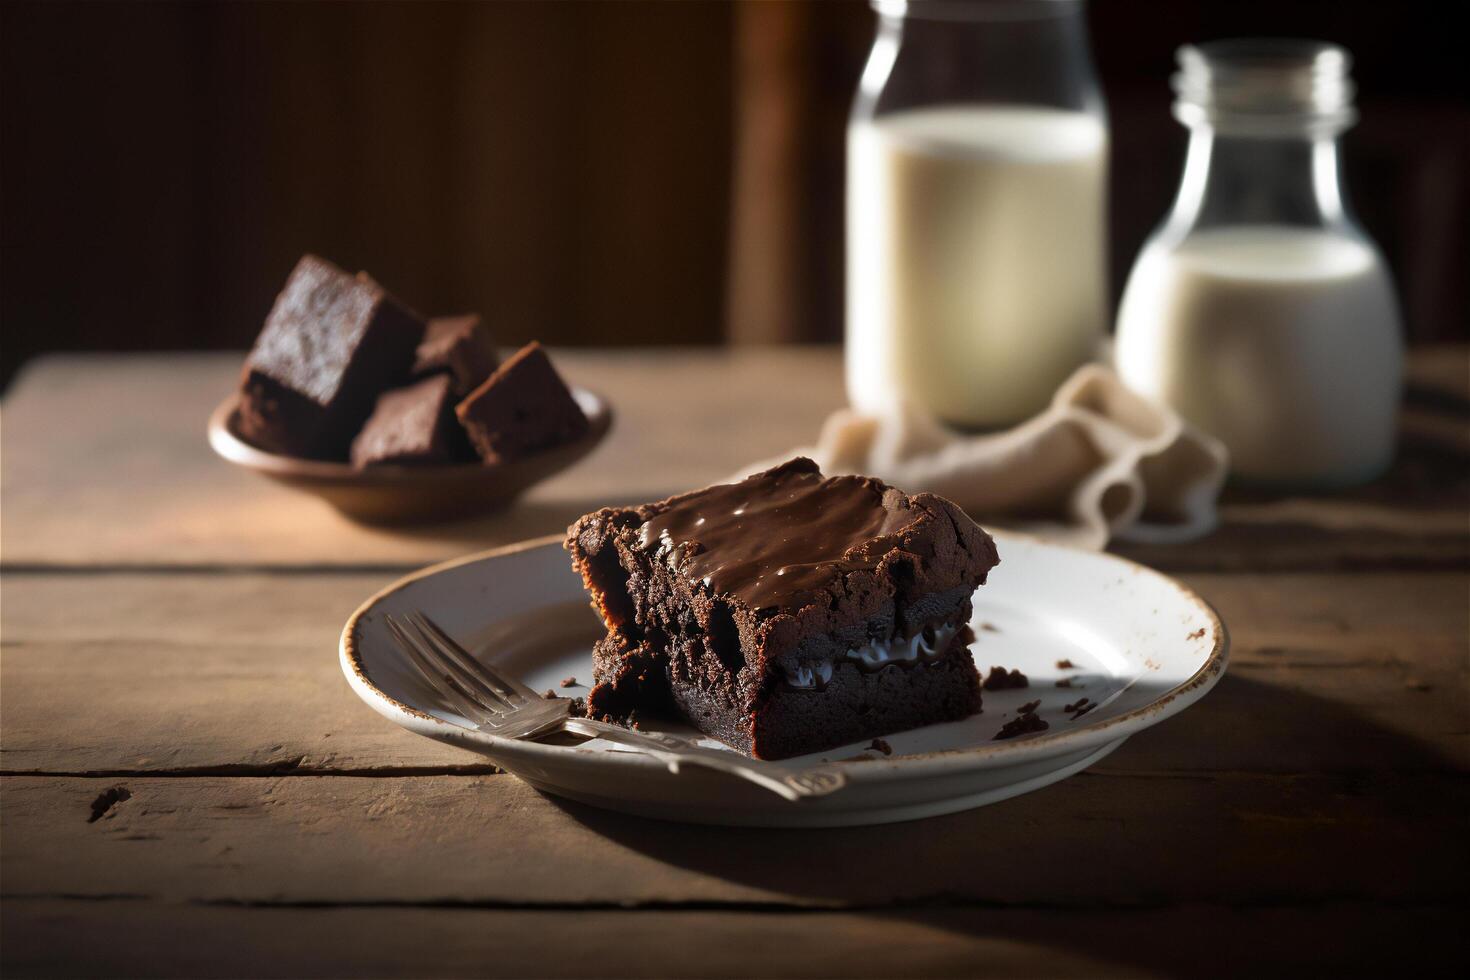 Delicious homemade chocolate brownie in white ceramic plate on rustic wooden table. . Selective focus photo